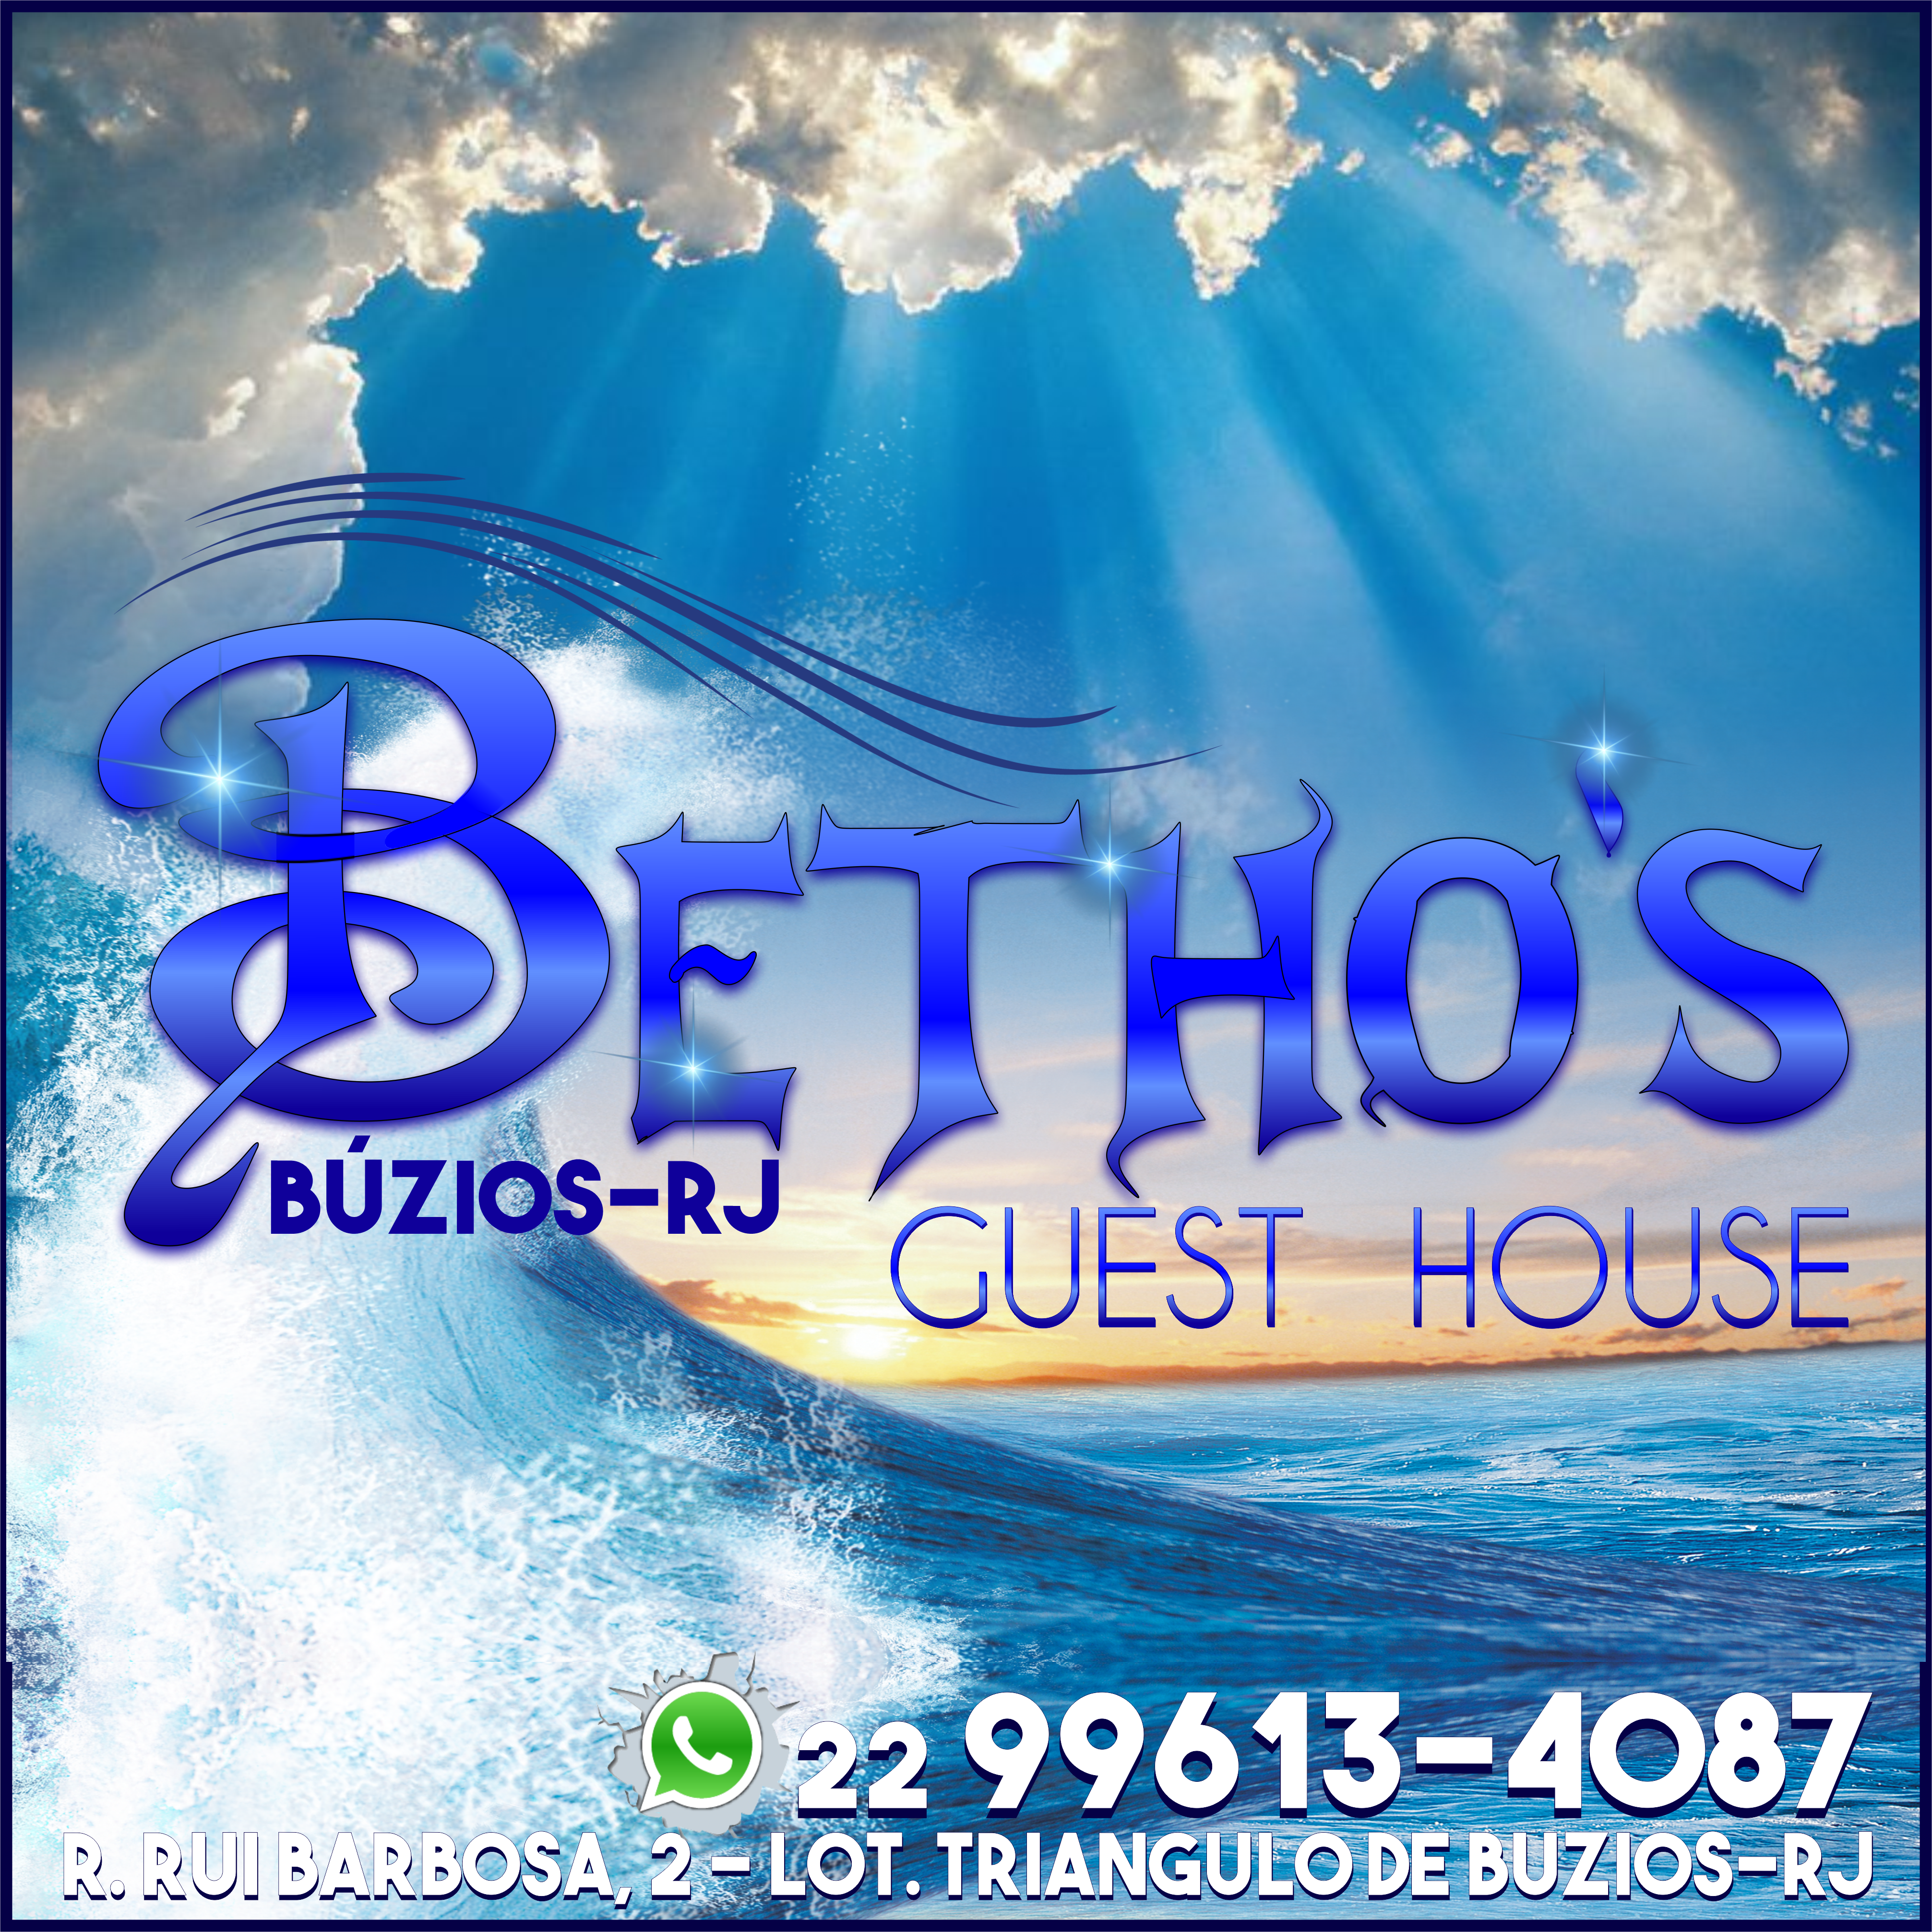 BETHO'S GUEST HOUSE